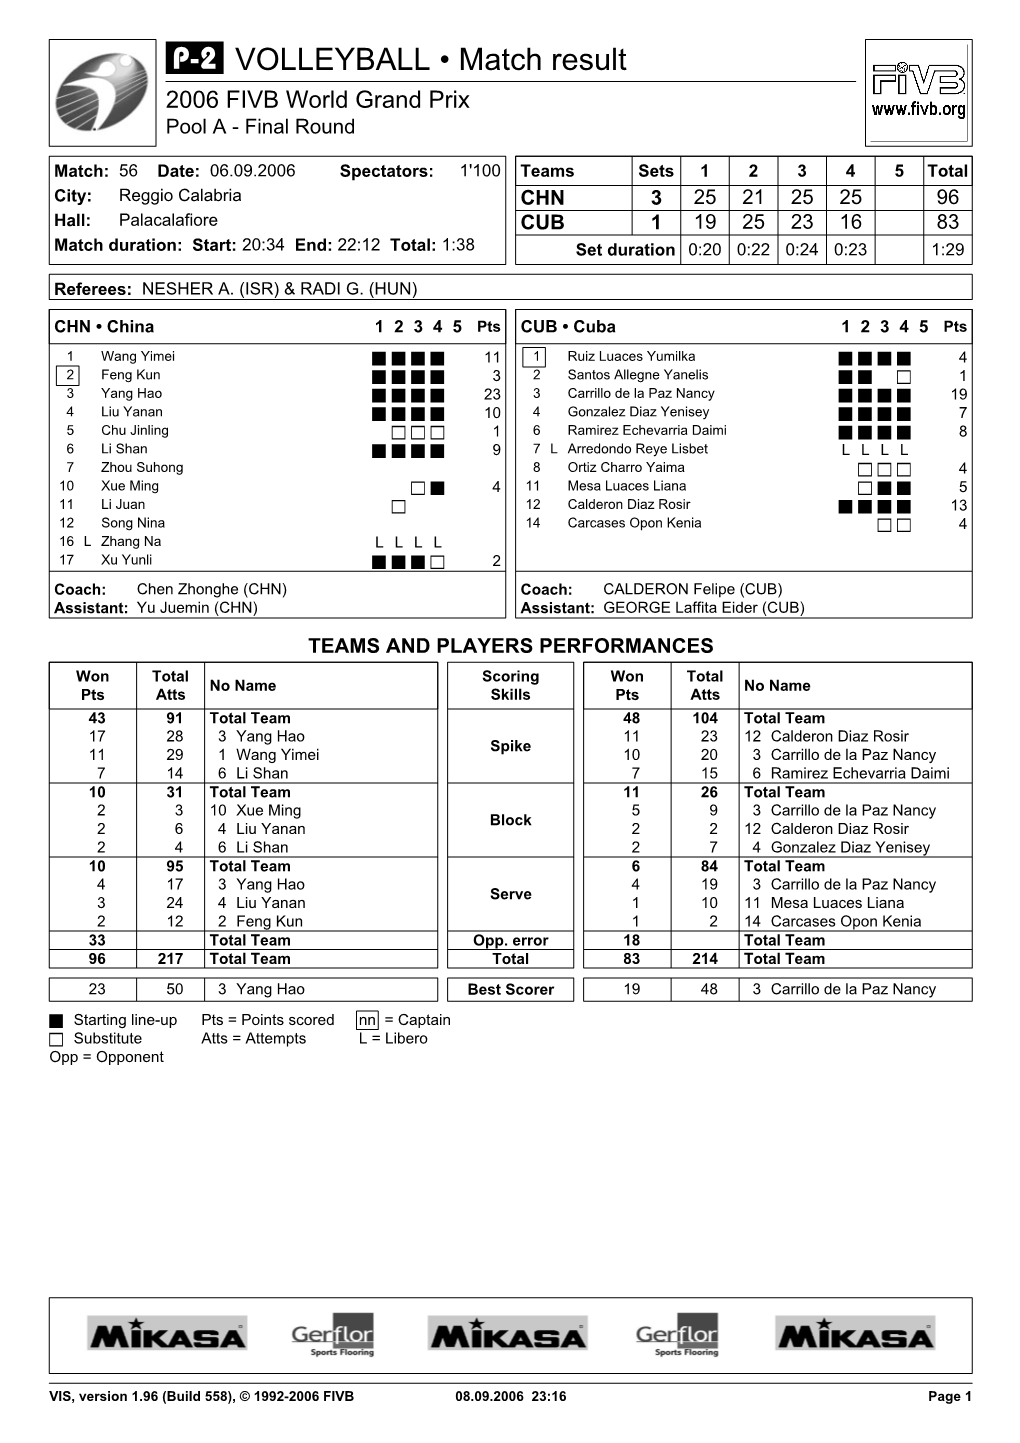 VOLLEYBALL • Match Result 2006 FIVB World Grand Prix Pool a - Final Round